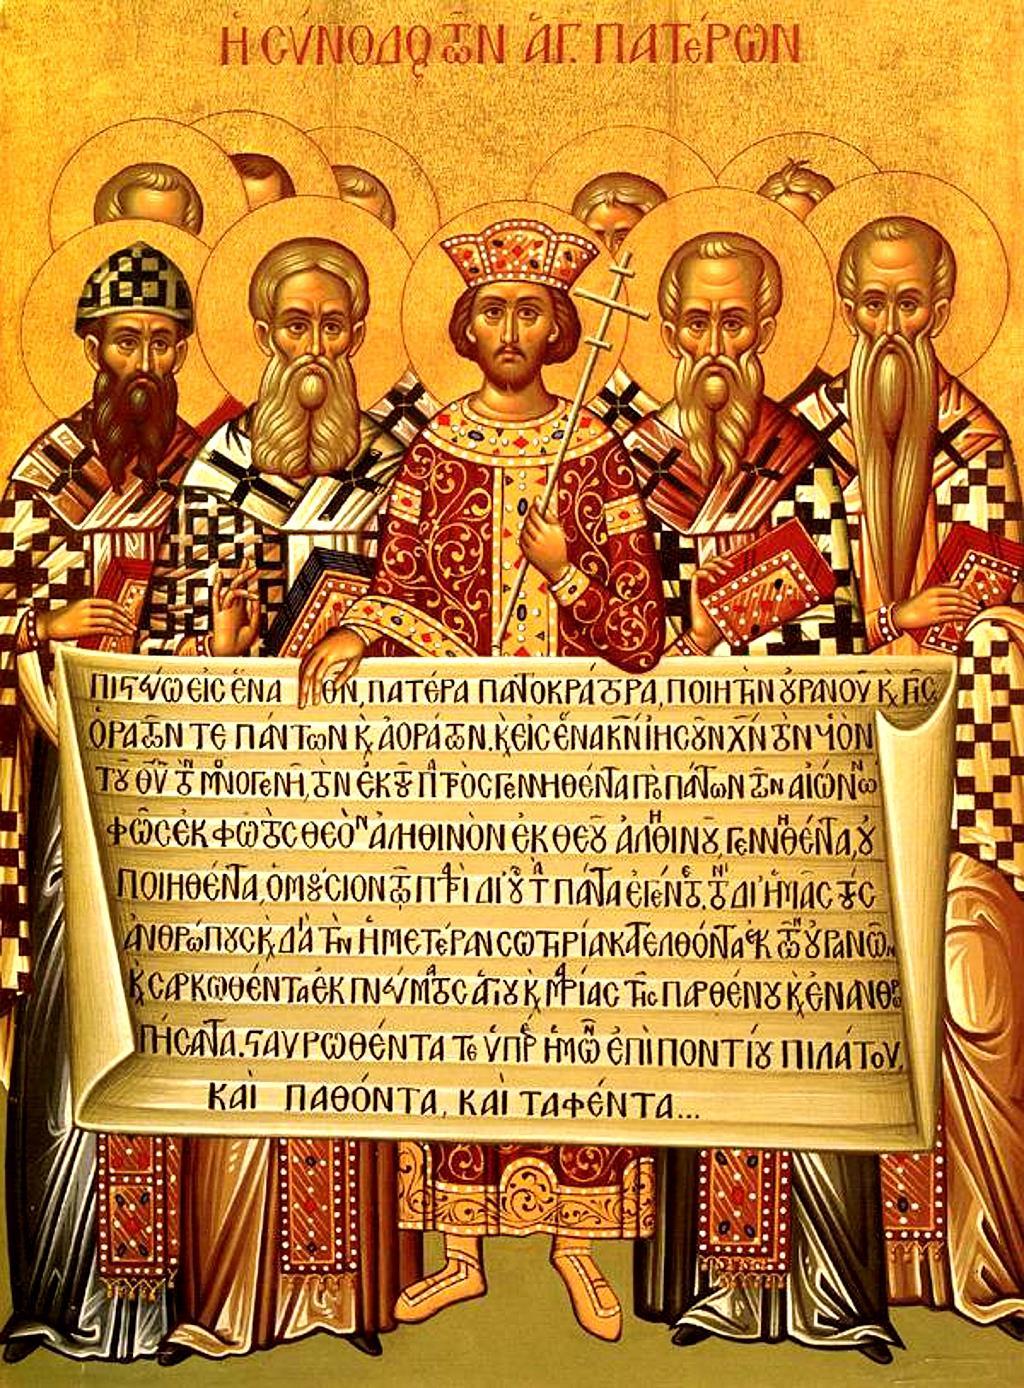 1 st Council of Nicea 325 AD Icon depicting the Emperor Constantine and the bishops of the First